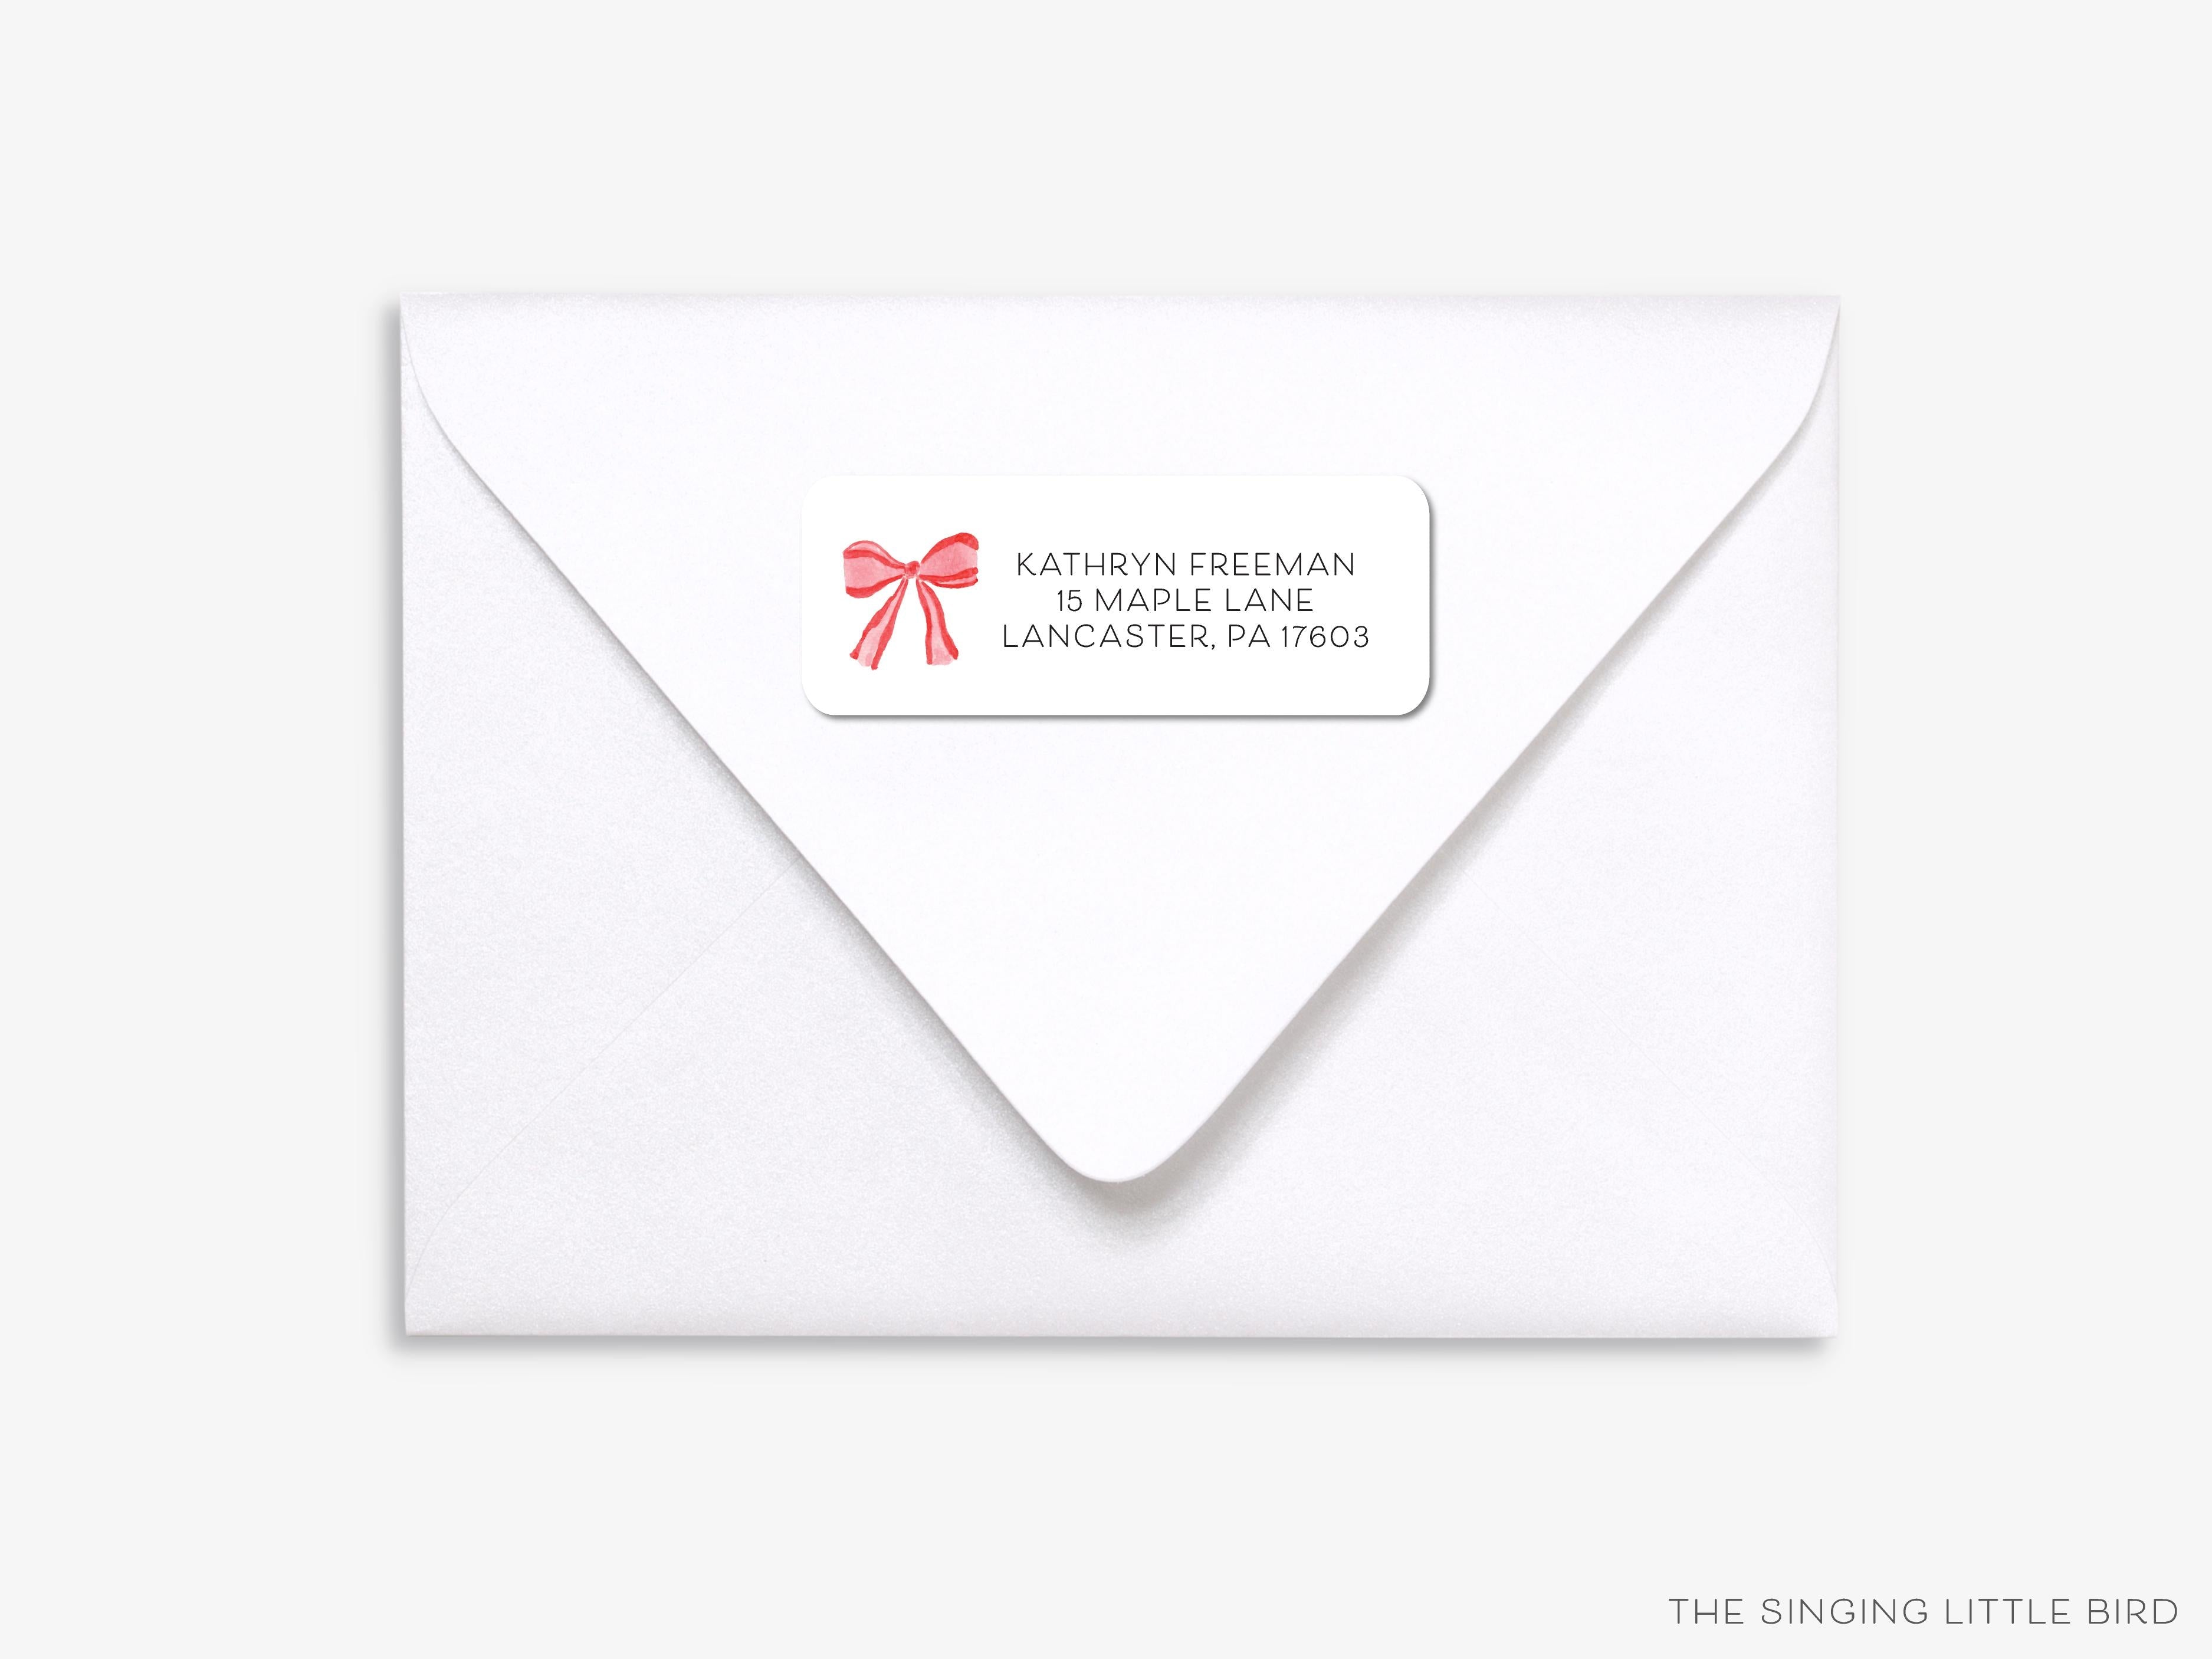 Red Bow Return Address Labels-These personalized return address labels are 2.625" x 1" and feature our hand-painted watercolor bow, printed in the USA on beautiful matte finish labels. These make great gifts for yourself or the bow lover.-The Singing Little Bird